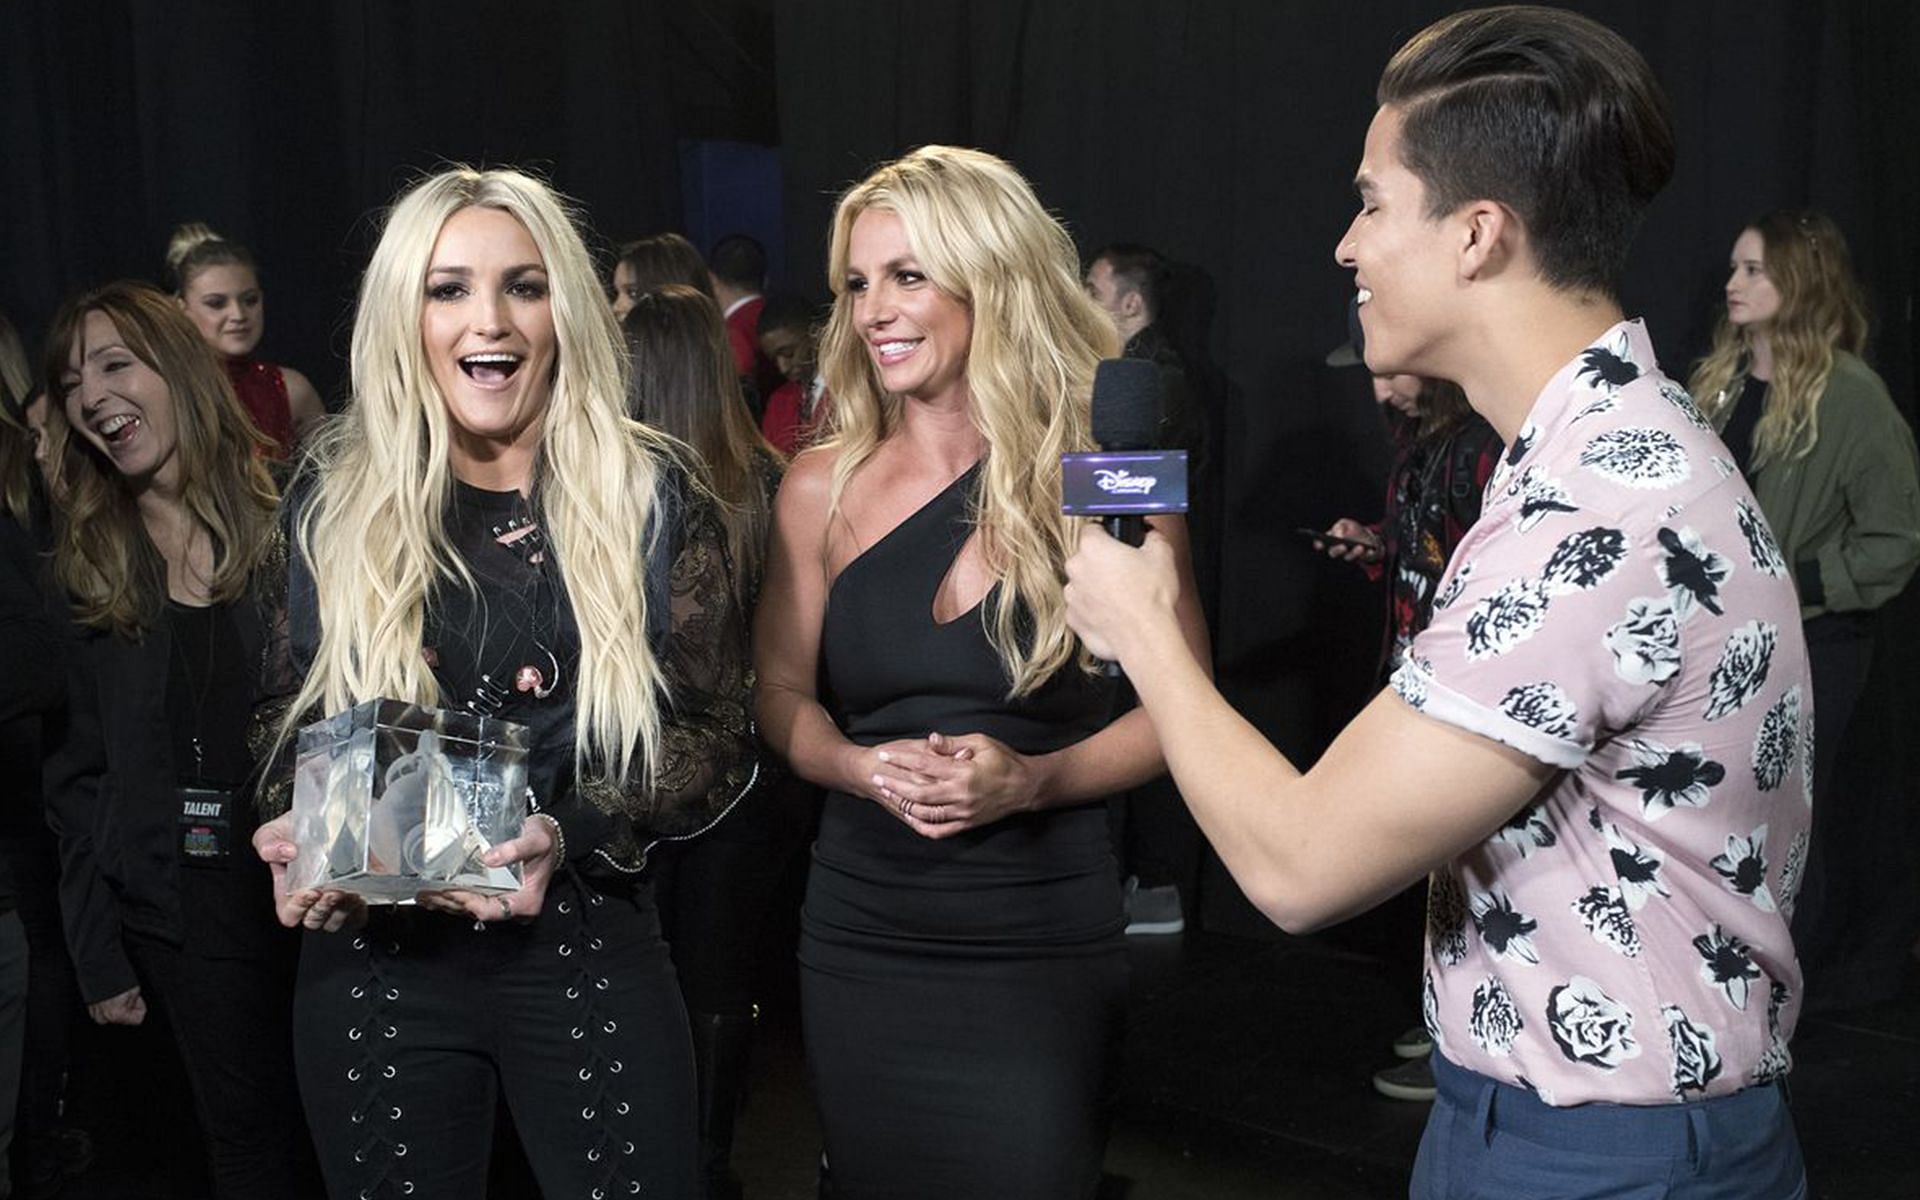 Jamie Lynn Spears and Britney Spears have been on rocky terms ever since the former&#039;s confession in June 2020&#039;s court hearing (Image via Getty Images/ Image Group LA)